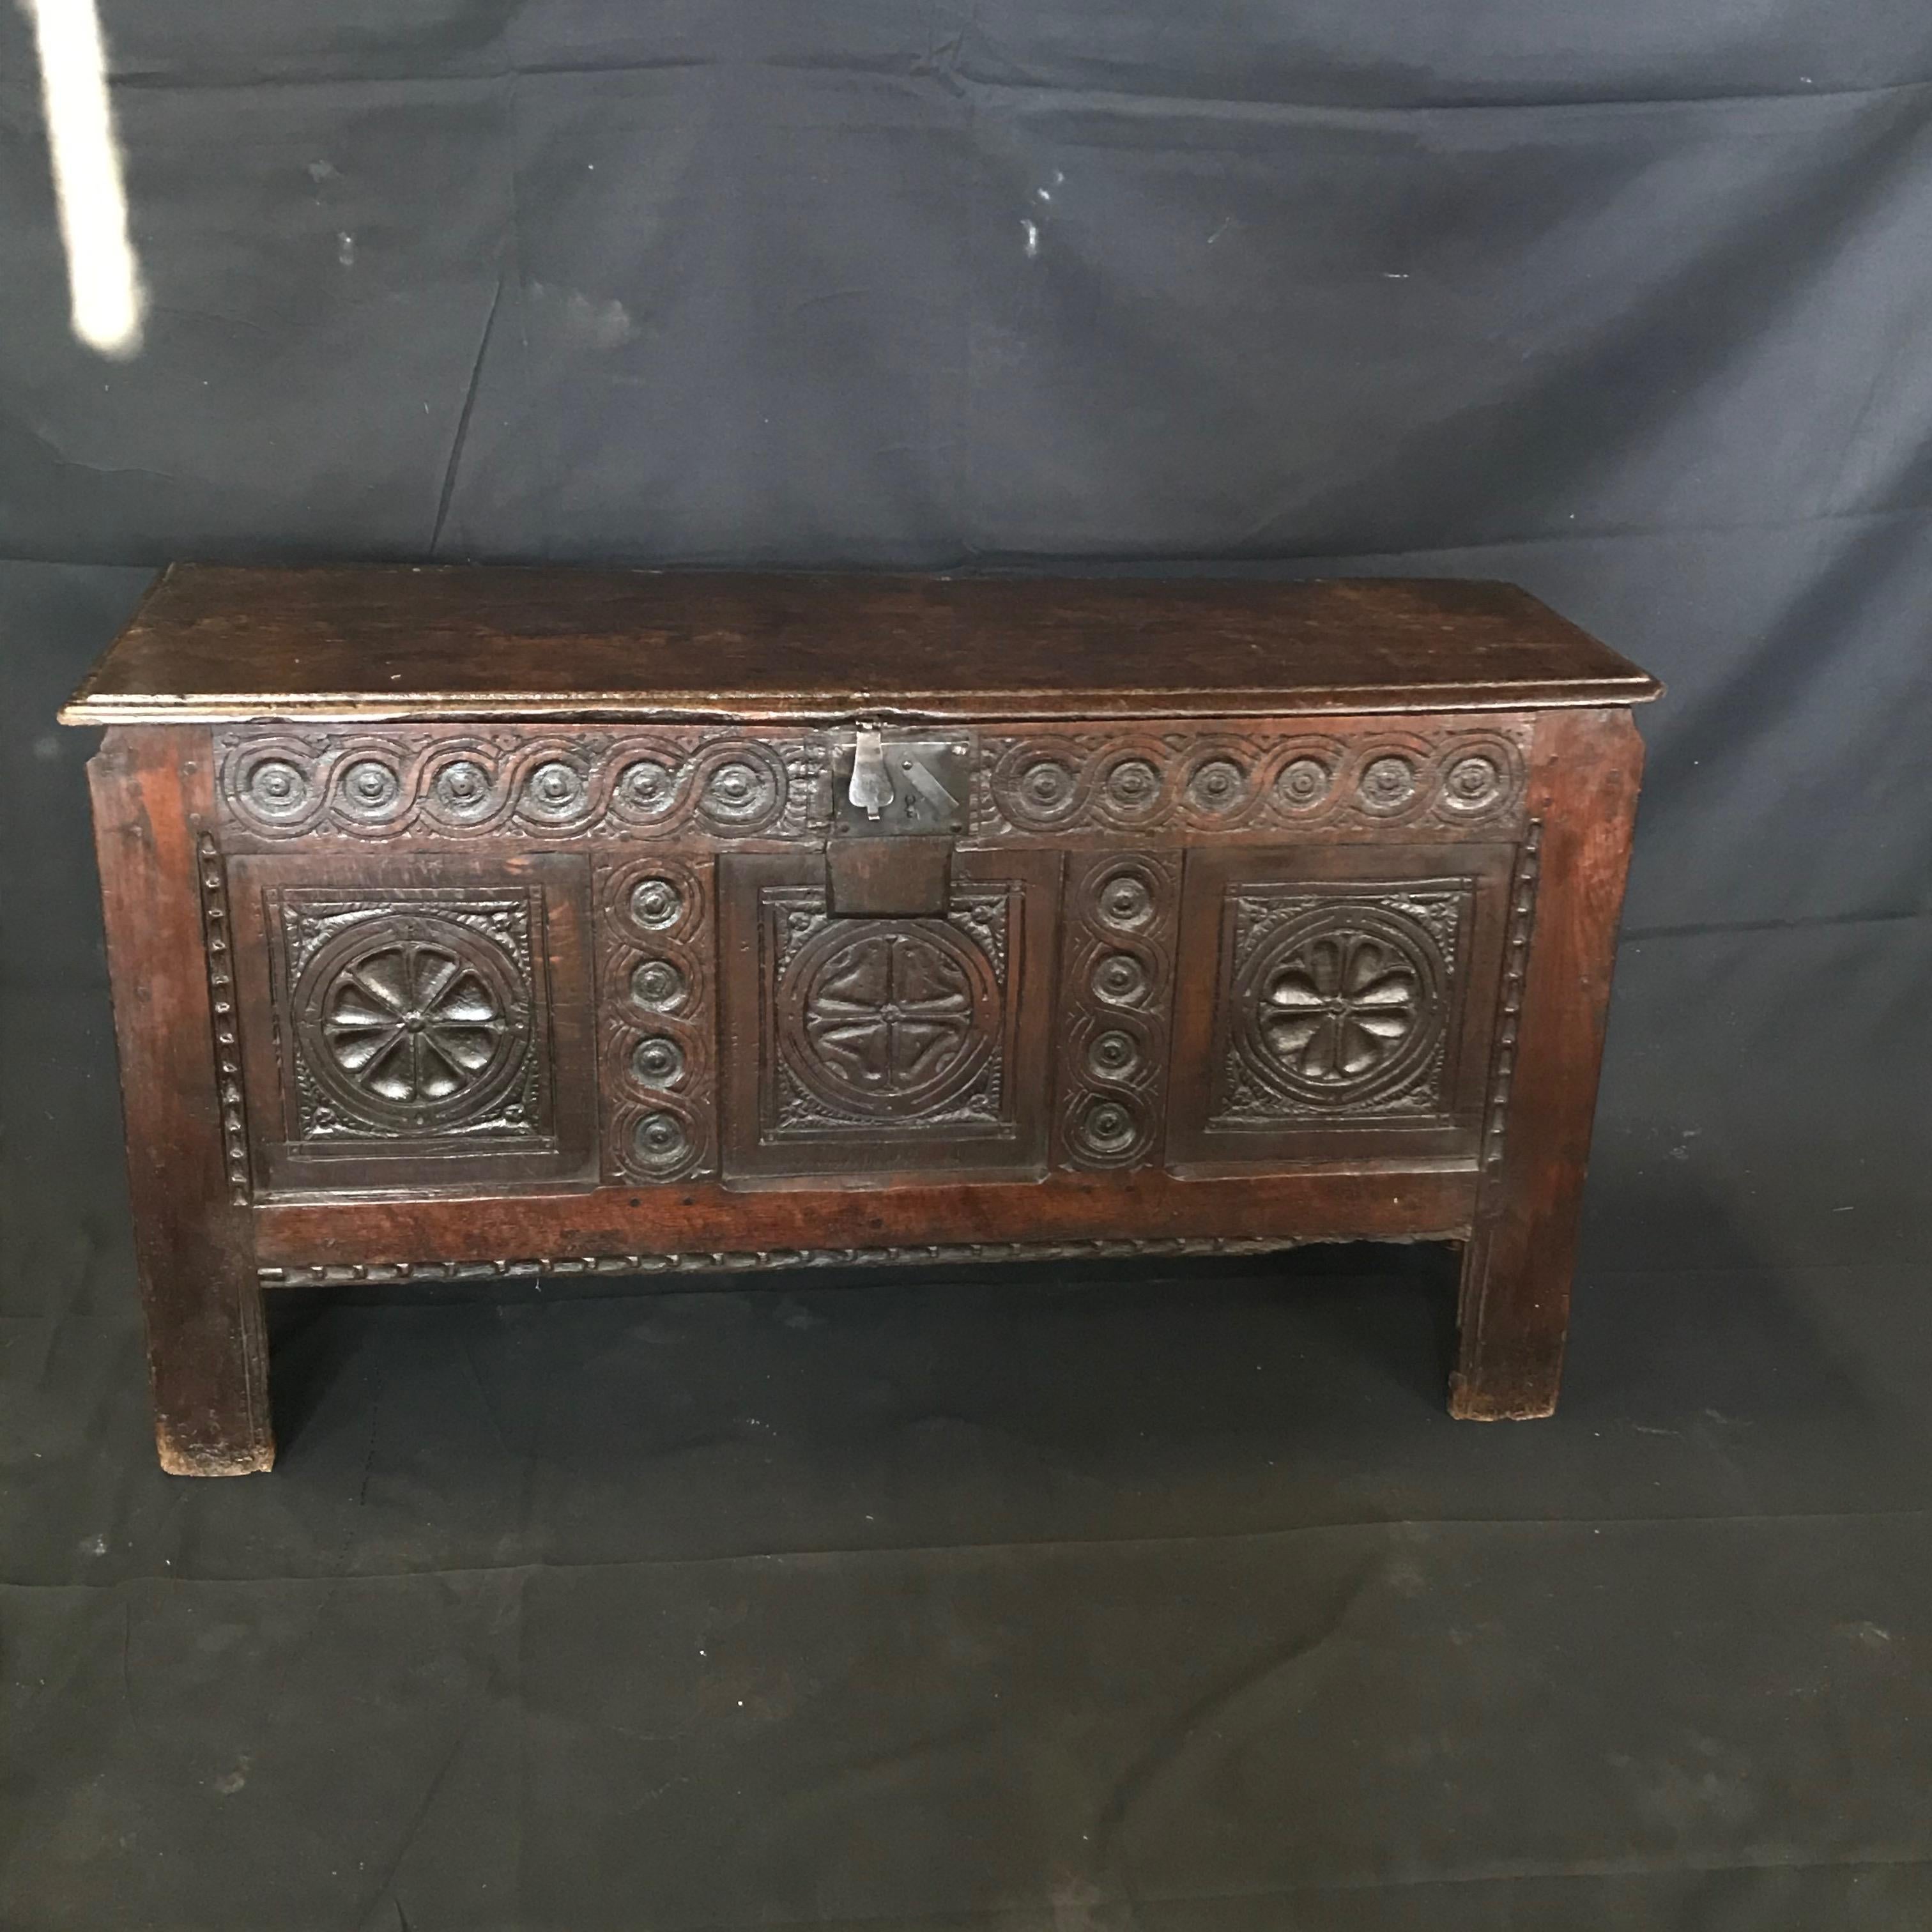 Exceptional early French coffer chest having a single plank top faced with a moulded edge and with a later iron hasp. The front has a beautifully carved gadrooned frieze above three panels separated by moulded uprights with punched decoration in the